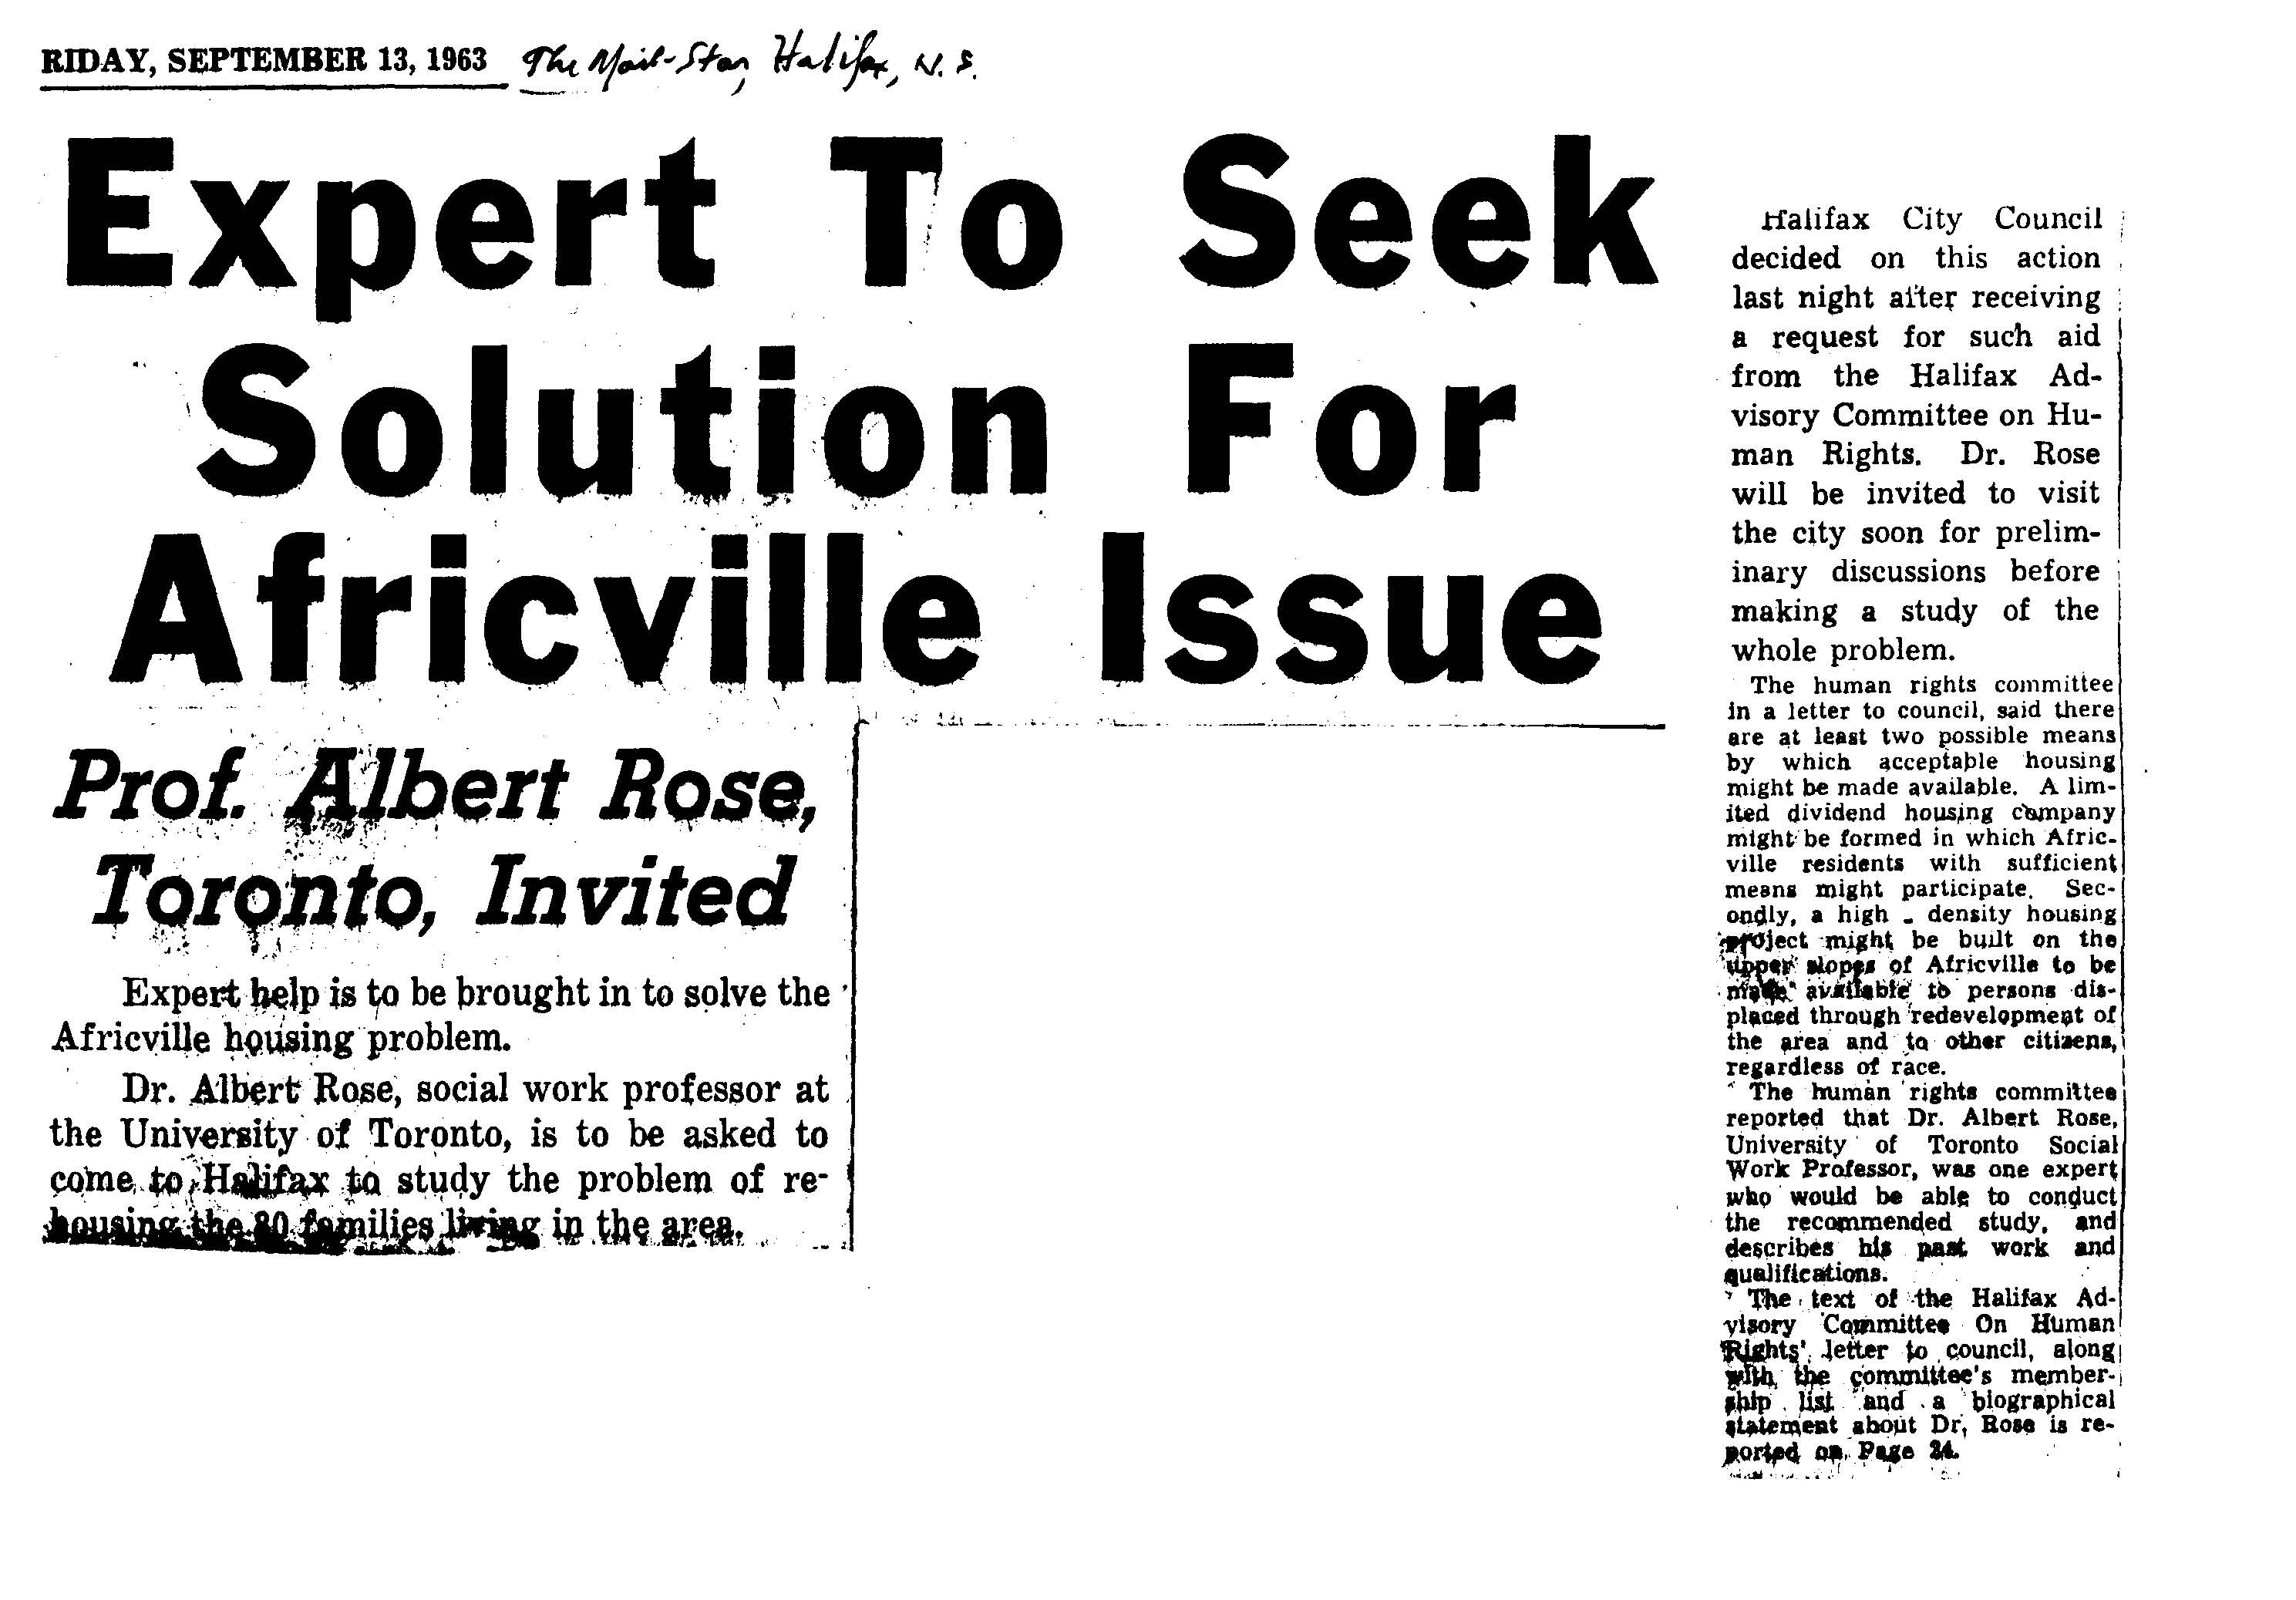 Black and white copy of newsclipping with headline “Expert to Seek Solution for Africville Issue – Prof. Albert Rose, Toronto, Invited”